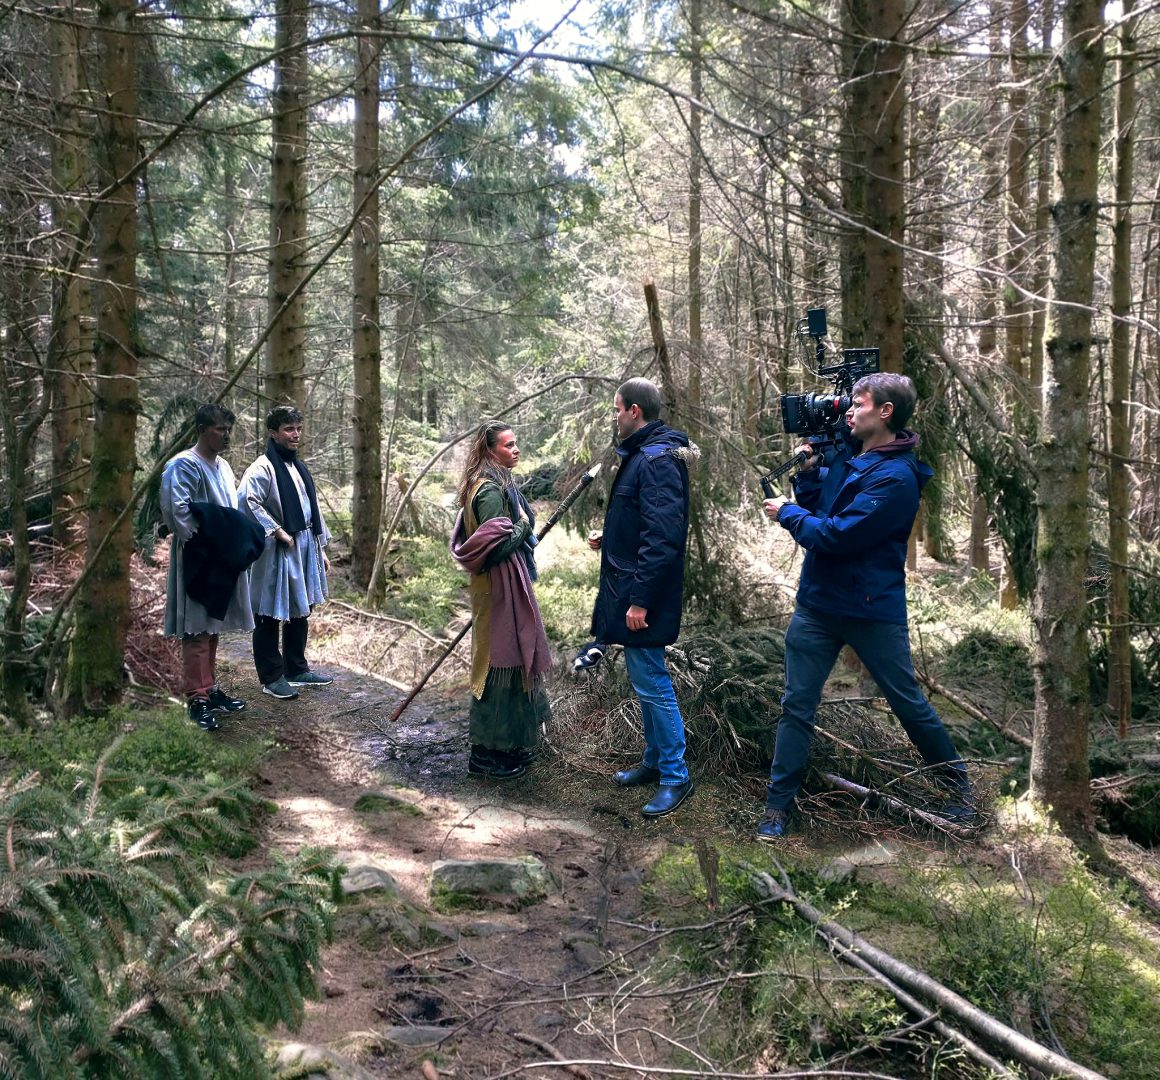 Shooting a Movie in the Black Forest